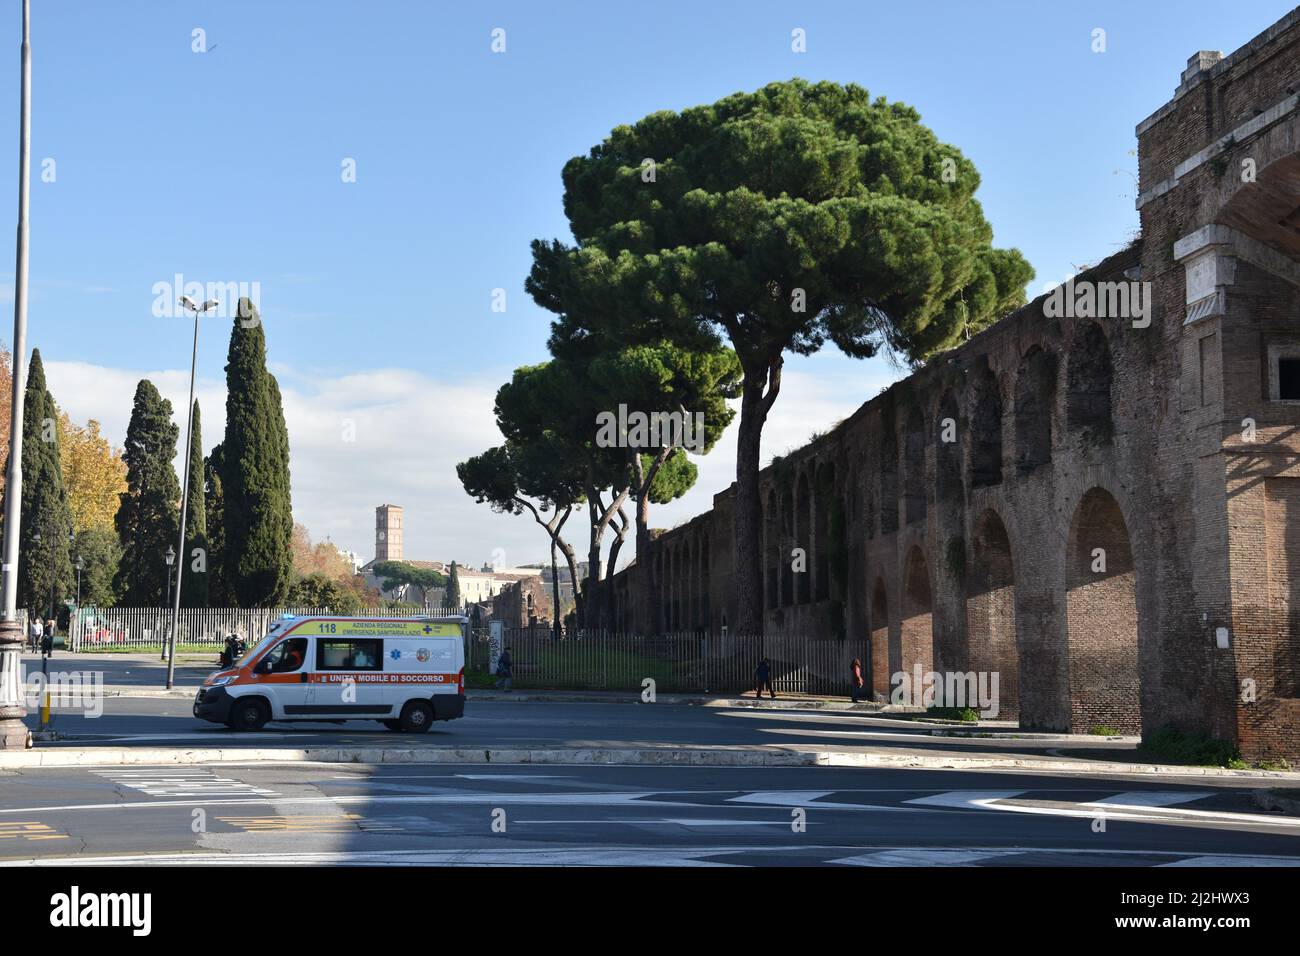 A contrast between modern and ancient times. An ambulance passes through the Aurelian Walls built between 27 and 275 AD. Rome, Italy, November 24, 201 Stock Photo